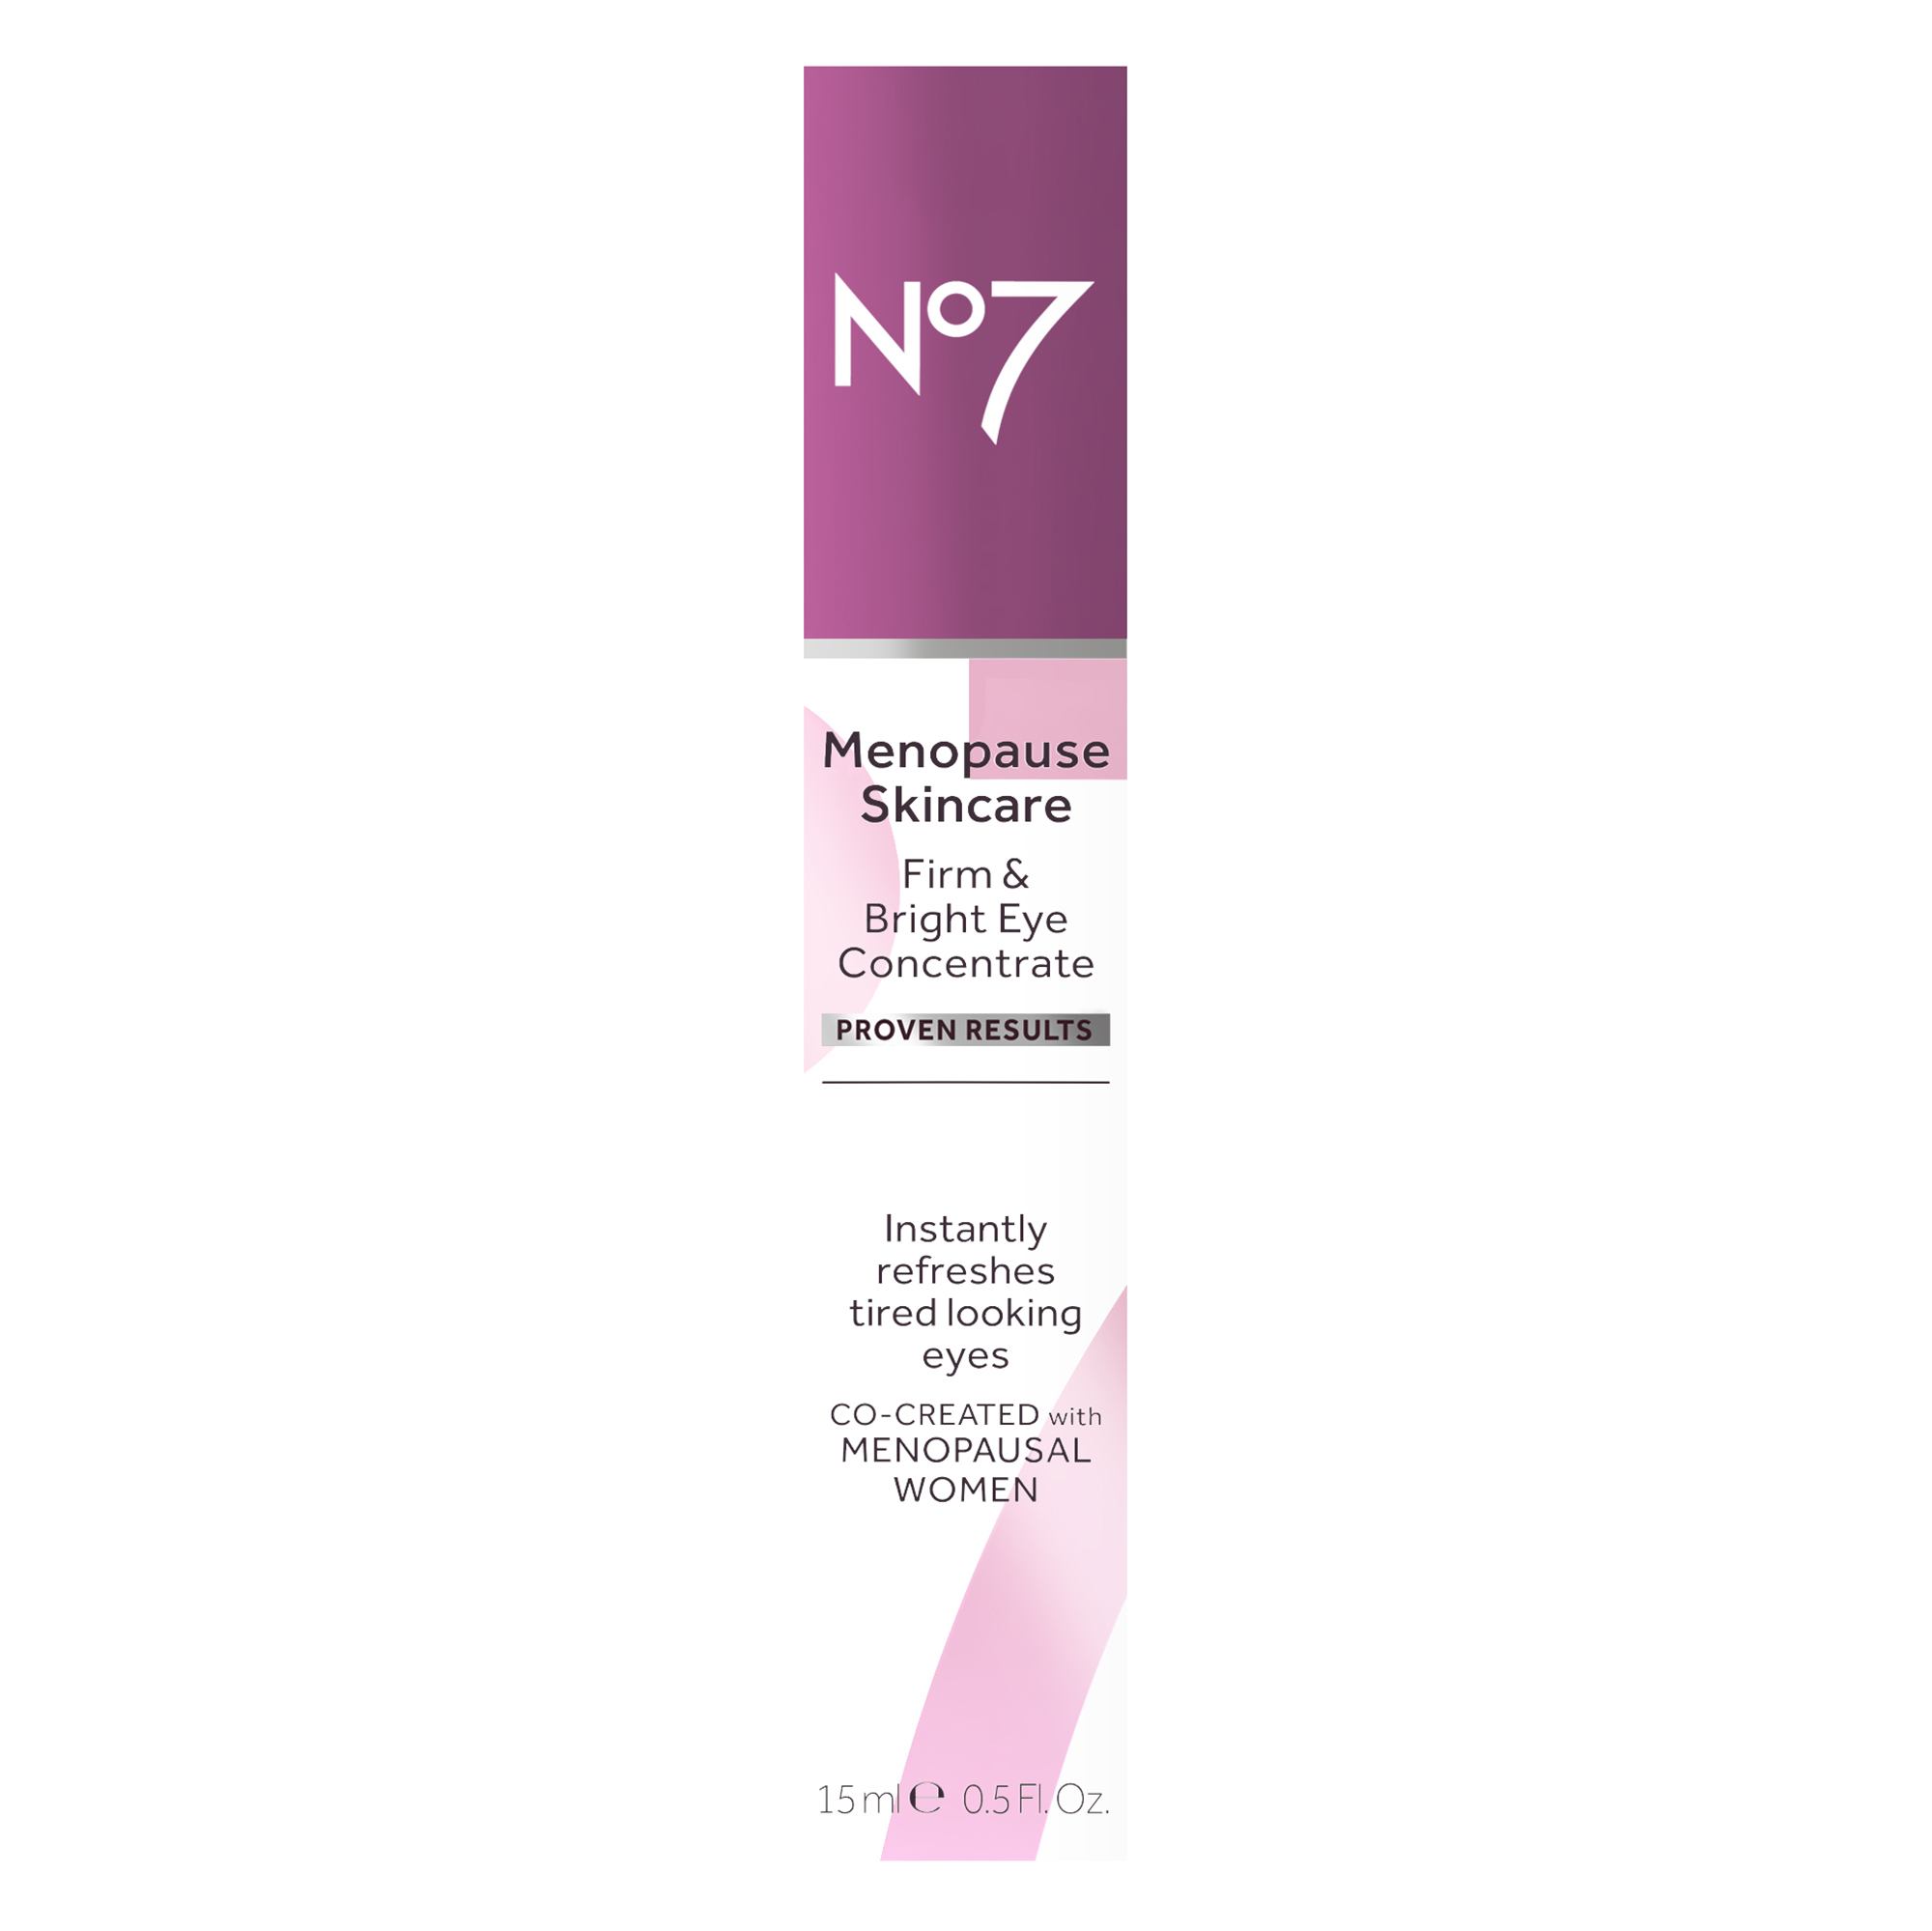 No7 Menopause Skincare Firm & Bright Eye Concentrate Serum for Dark Circles and Wrinkles, 0.5 oz - image 9 of 10